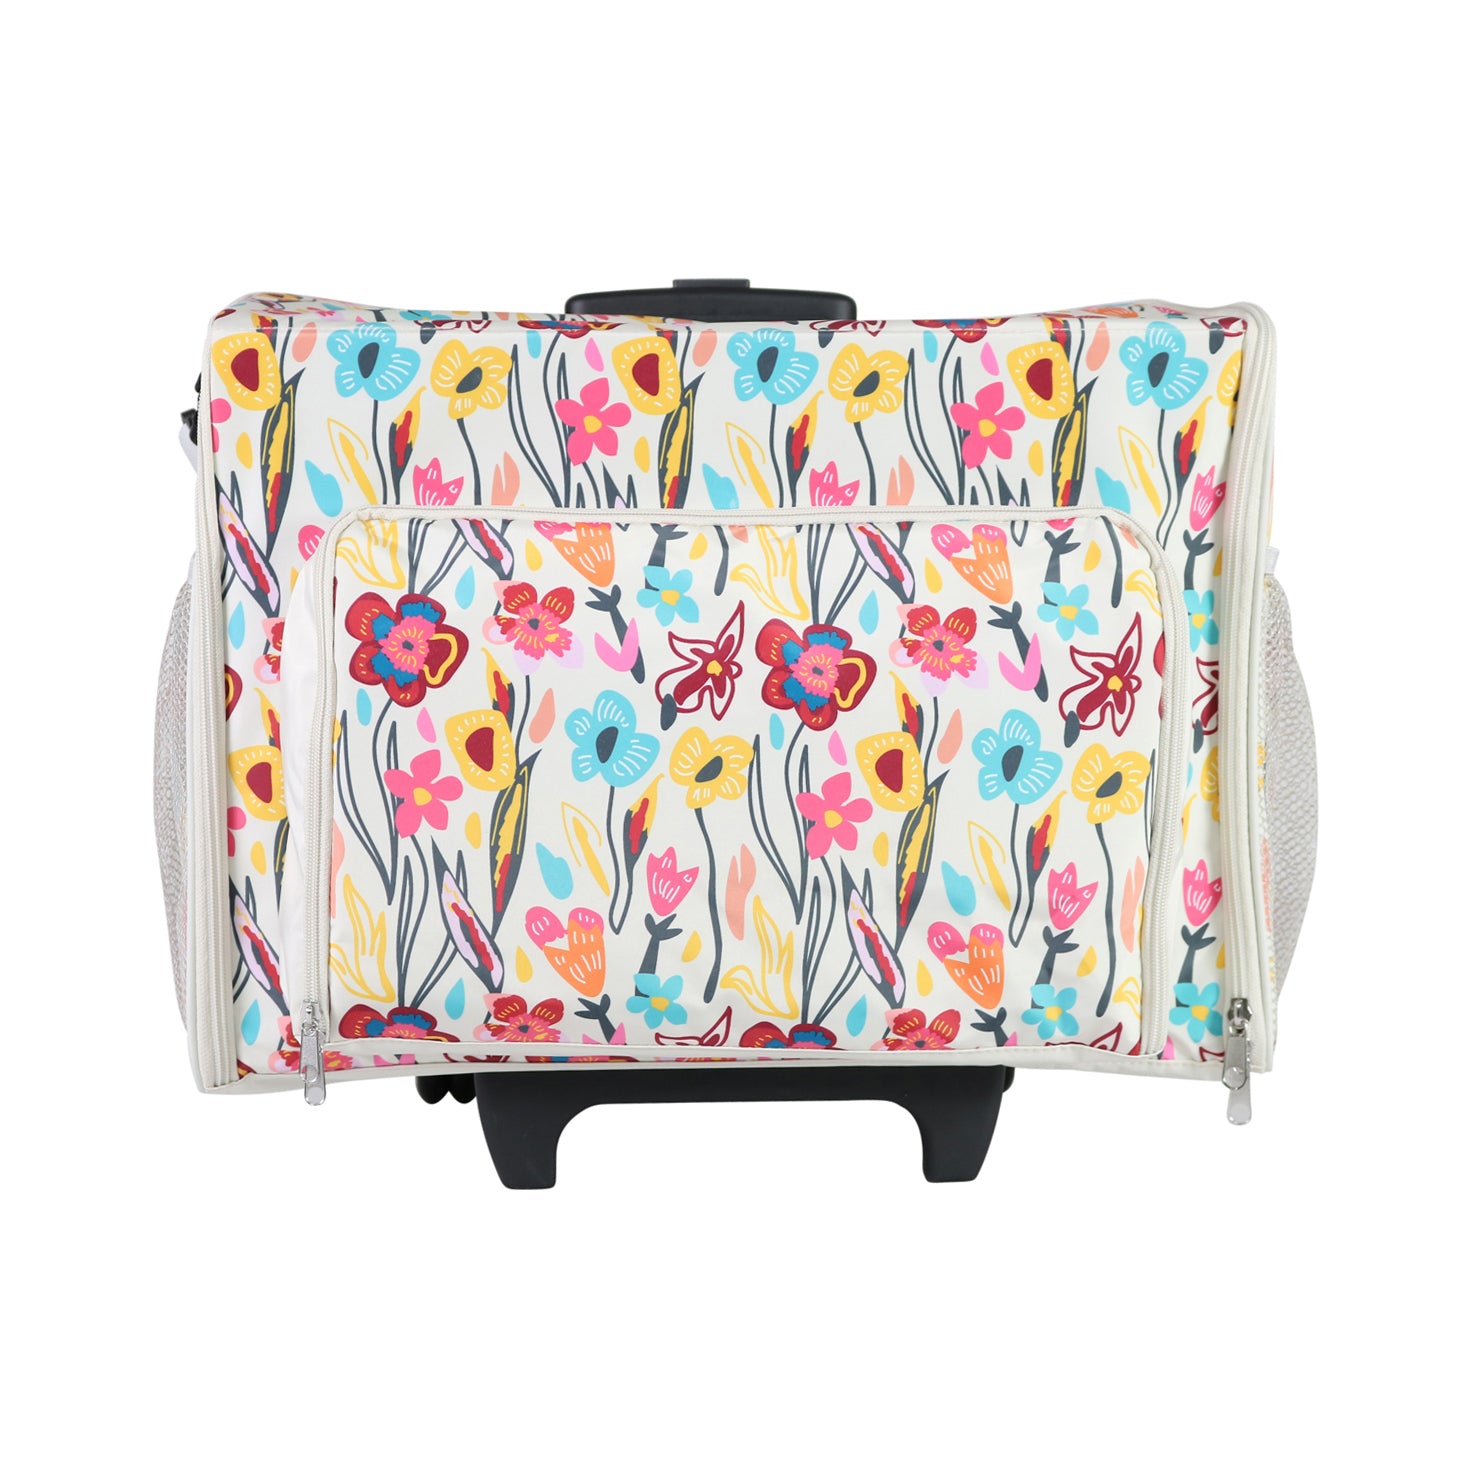 Deluxe Rolling Nurse Bag, Tan Floral - Everything Mary